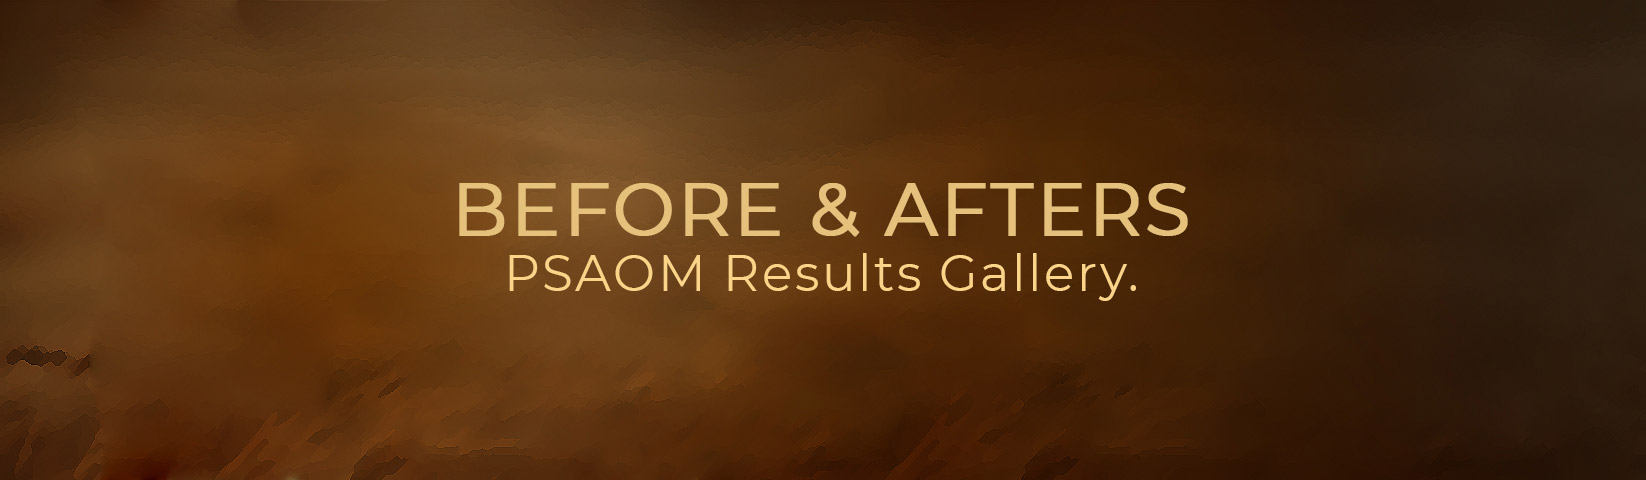 Before & Afters: PSAOM Results Gallery